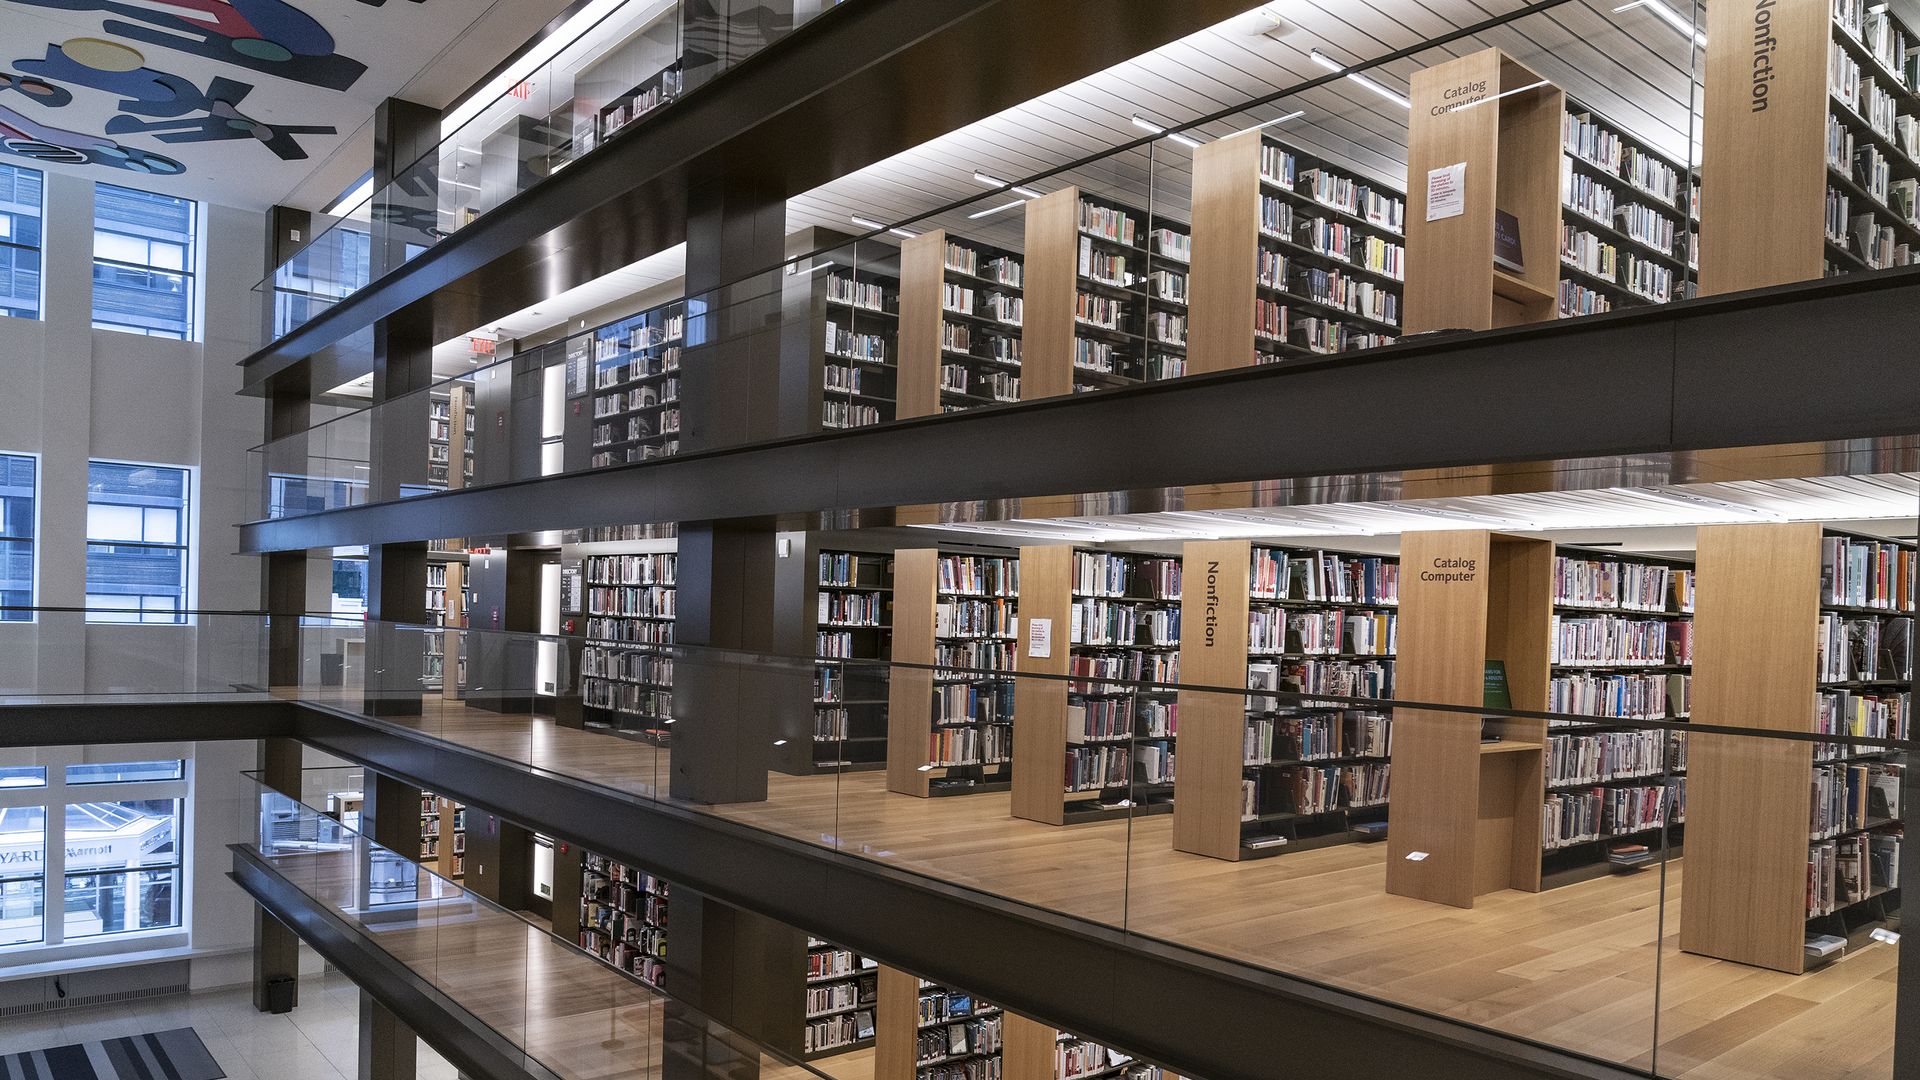 Photo of multiple floors of bookshelves at a library